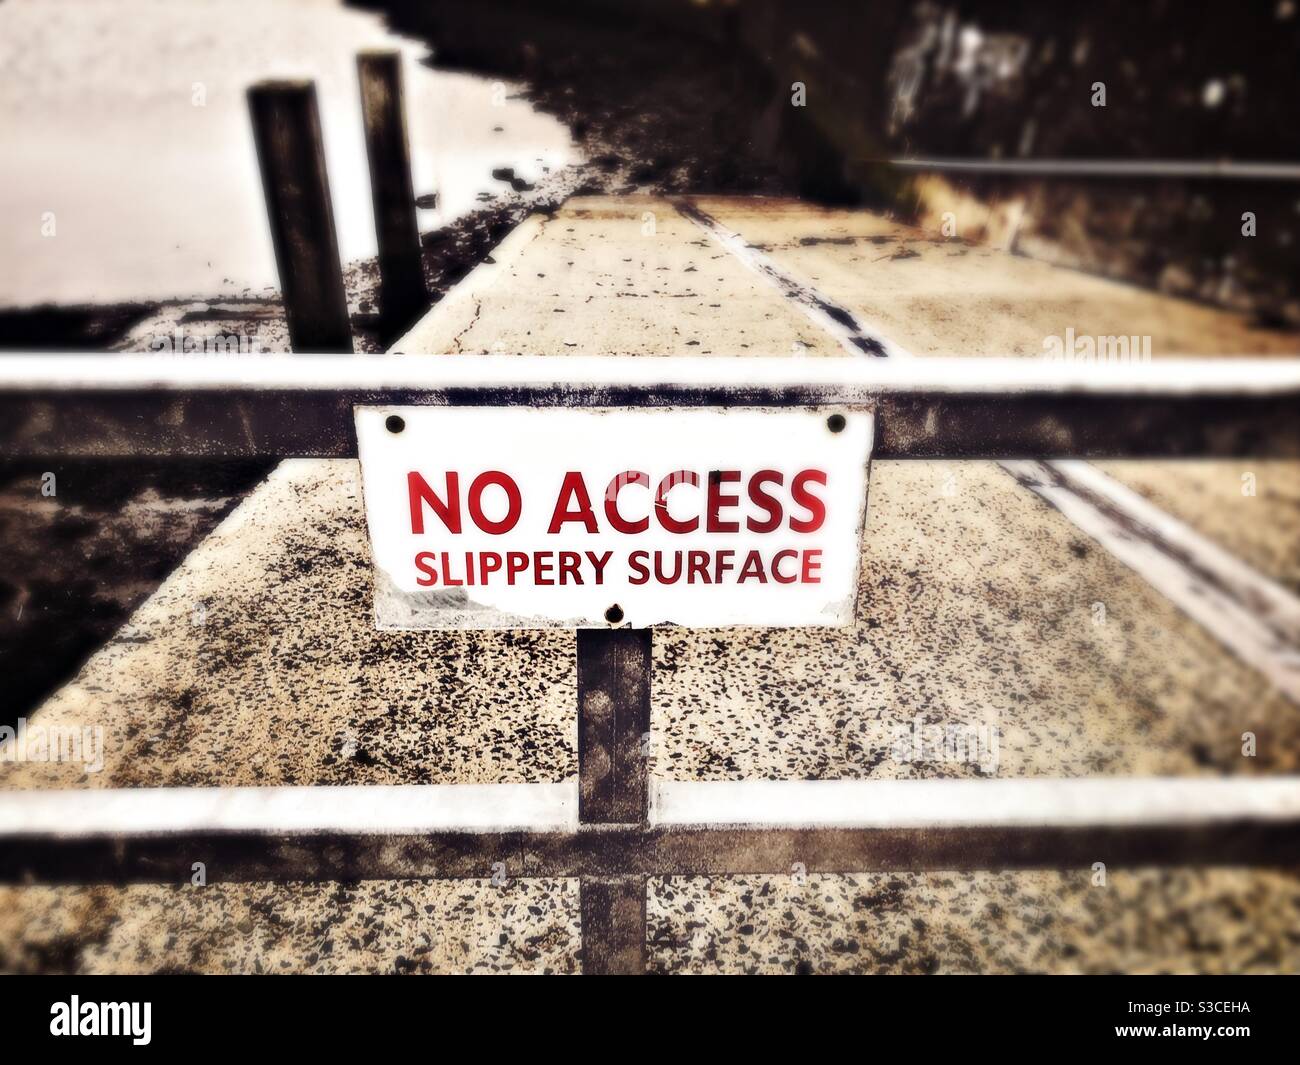 No Access Slippery Surface sign on a metal barrier Stock Photo